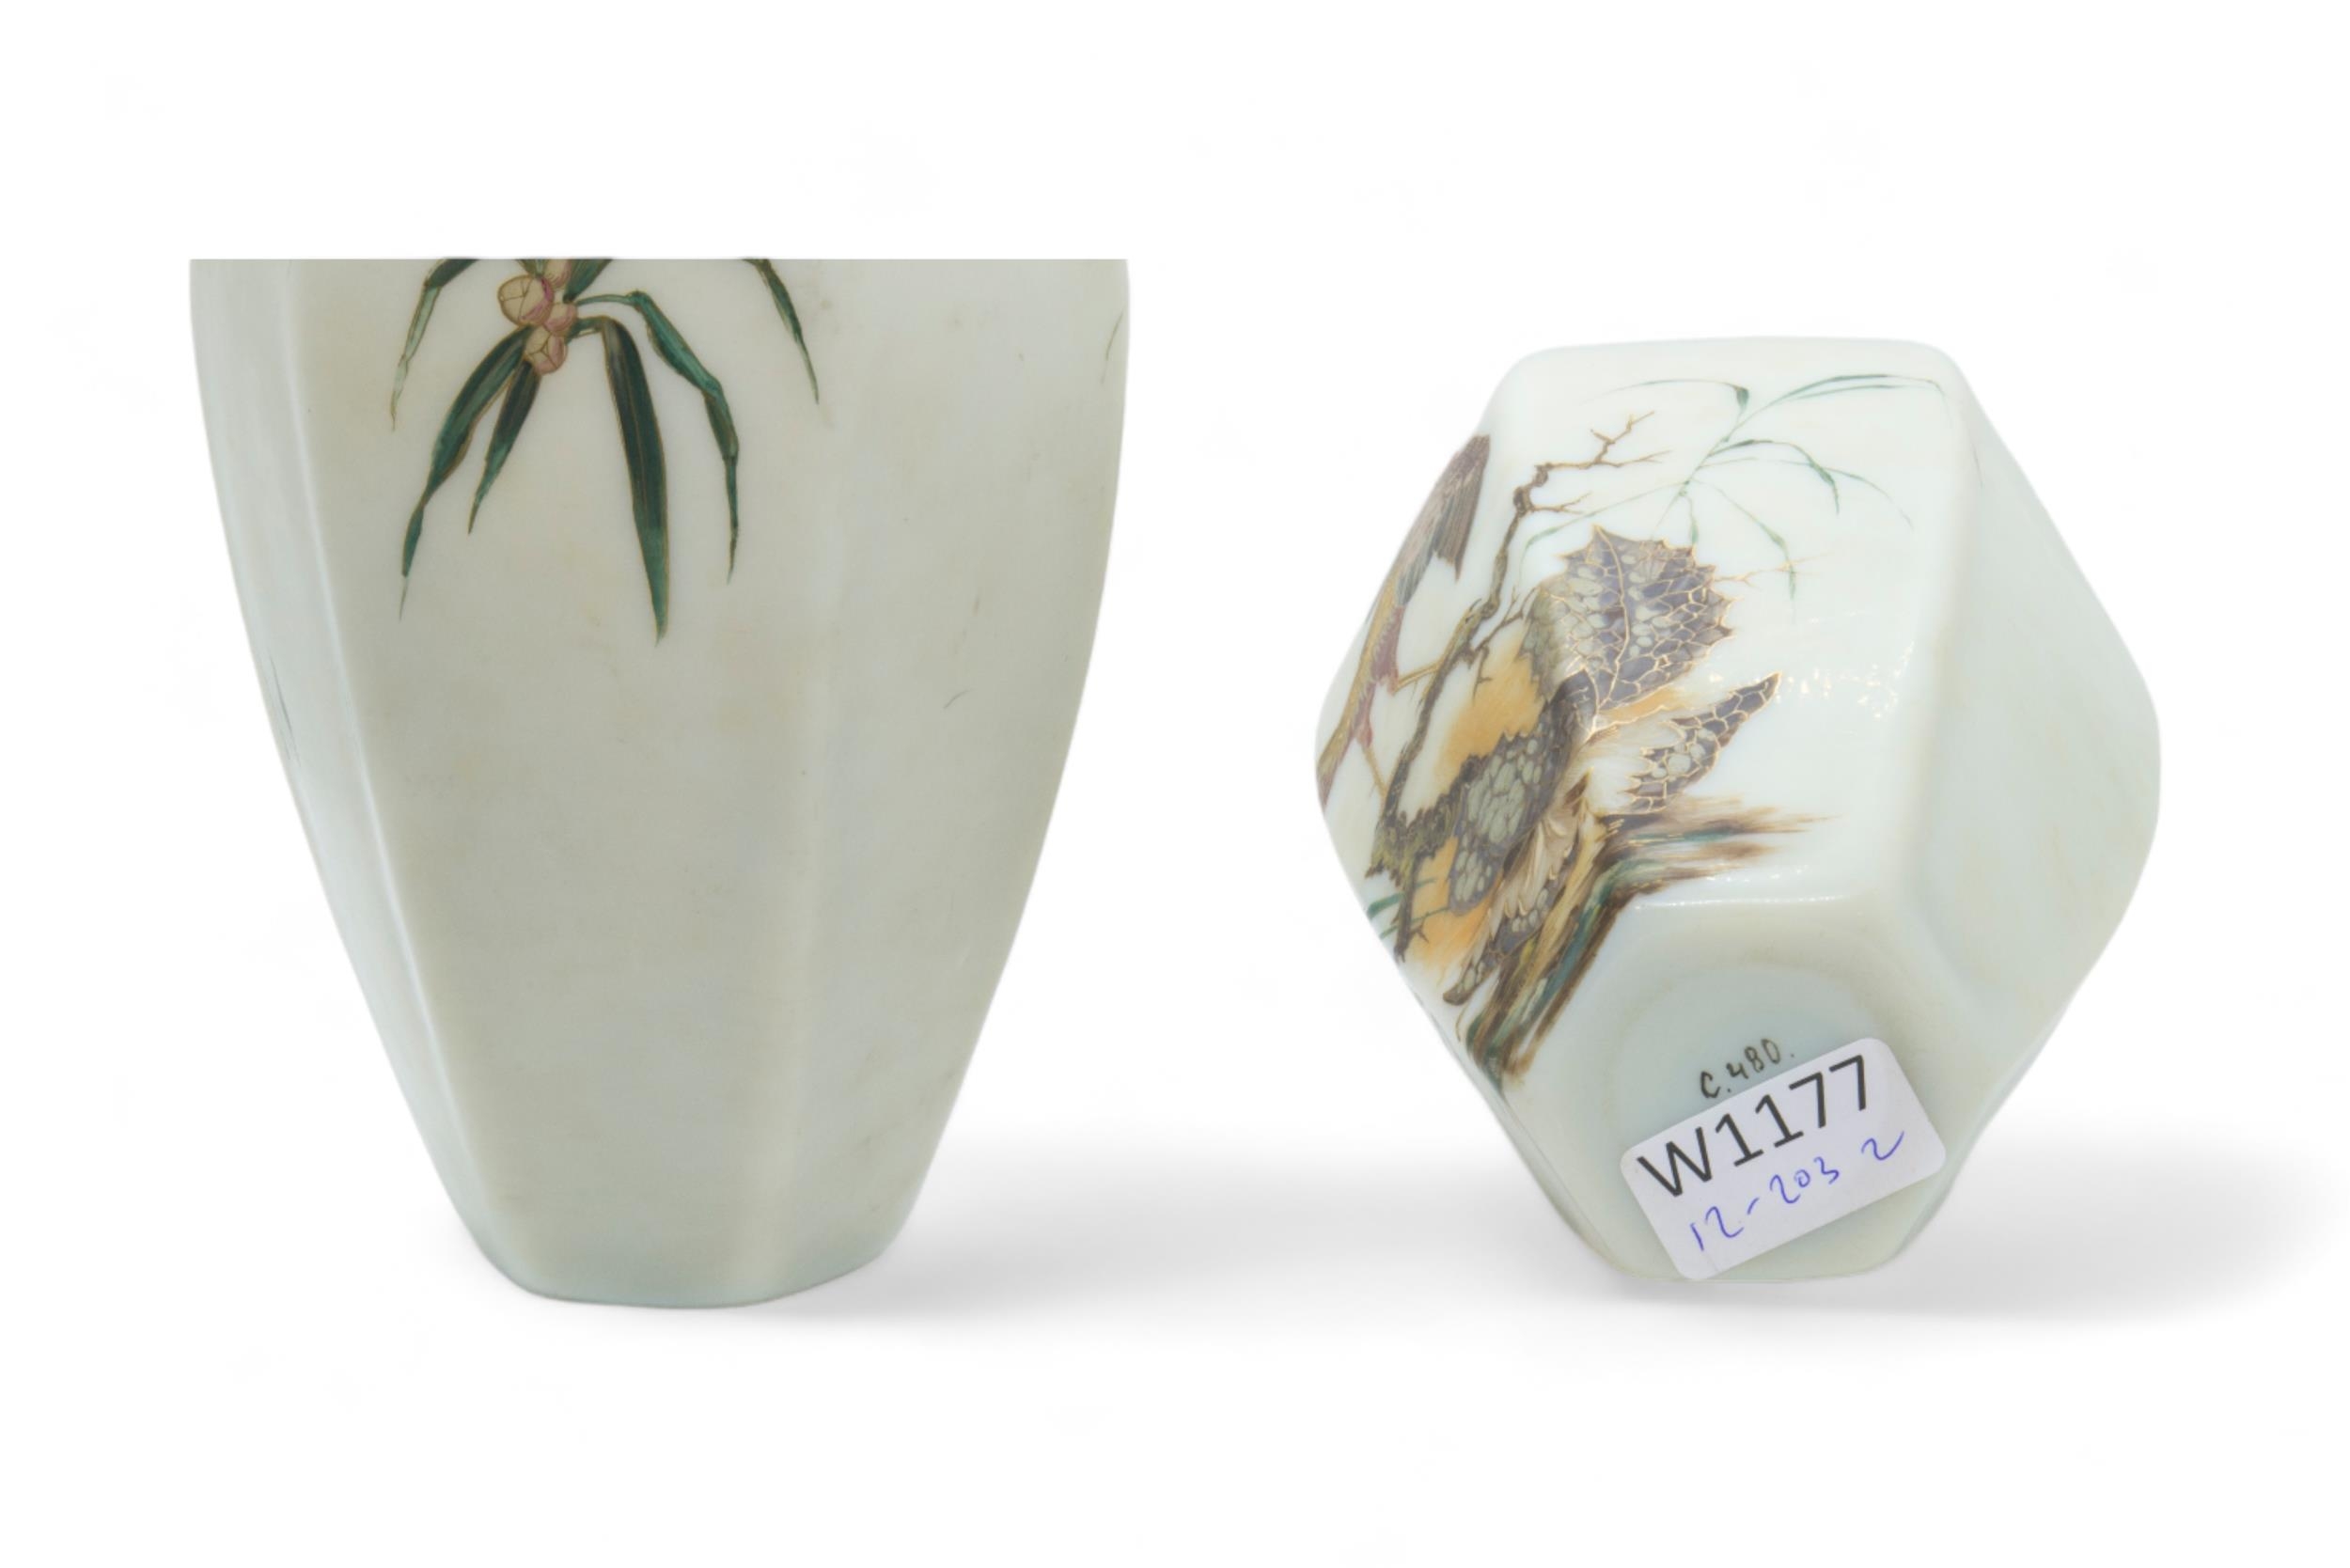 A PAIR OF ENAMELED SATIN GLASS VASES Late 19th century, 22cms high - Image 2 of 2